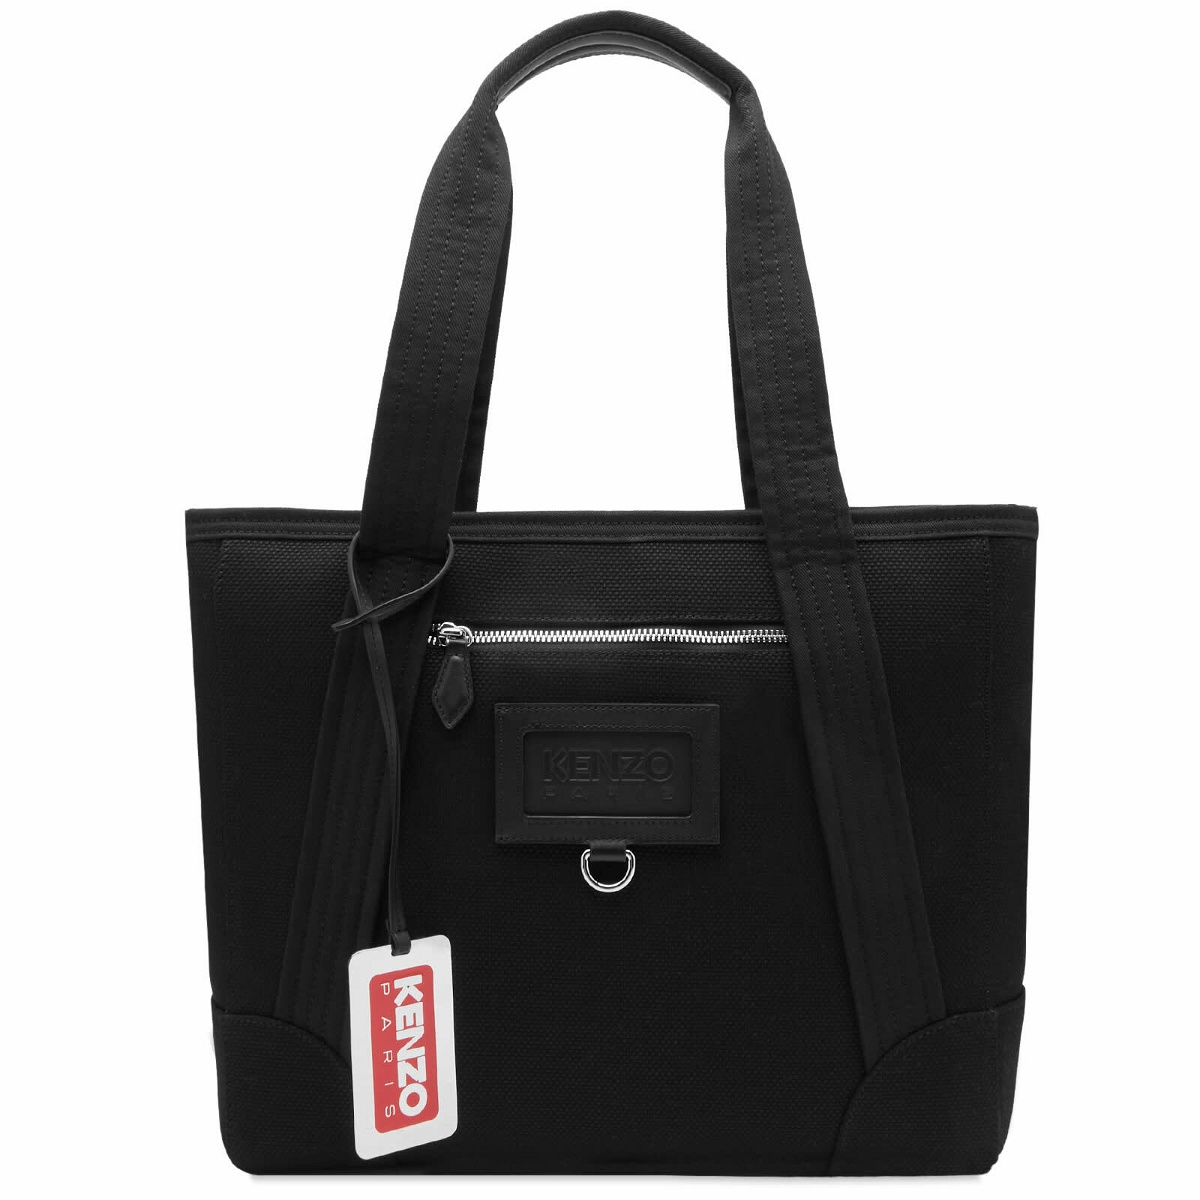 Kenzo Large Tote Bag With Small Logo in Black Kenzo